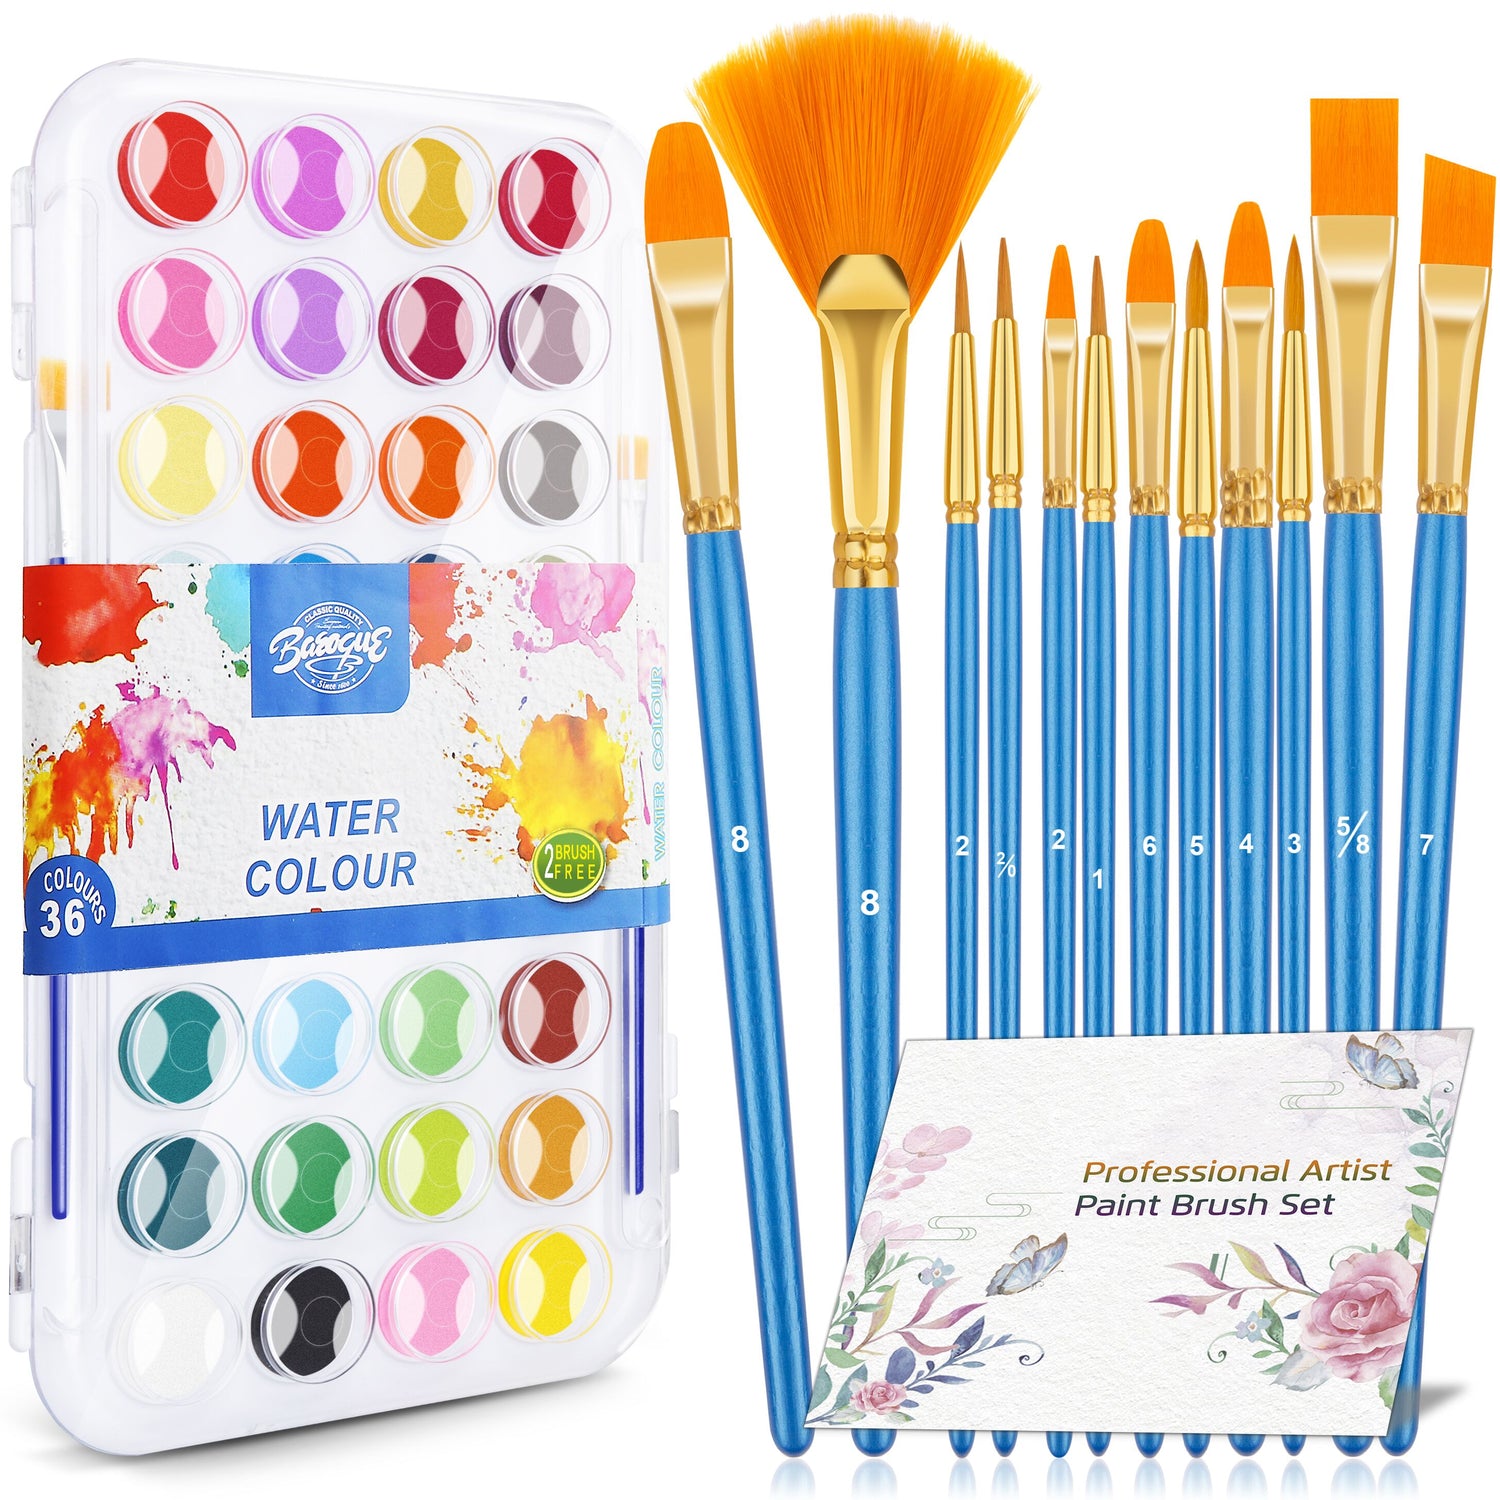 Homoyoyo 12pcs Nylon Painting Brushes Kids Kits Craft Supplies Office  Products Color Drawing Brushes Art Brushes Artist Detail paintbrushes Kids  Suits